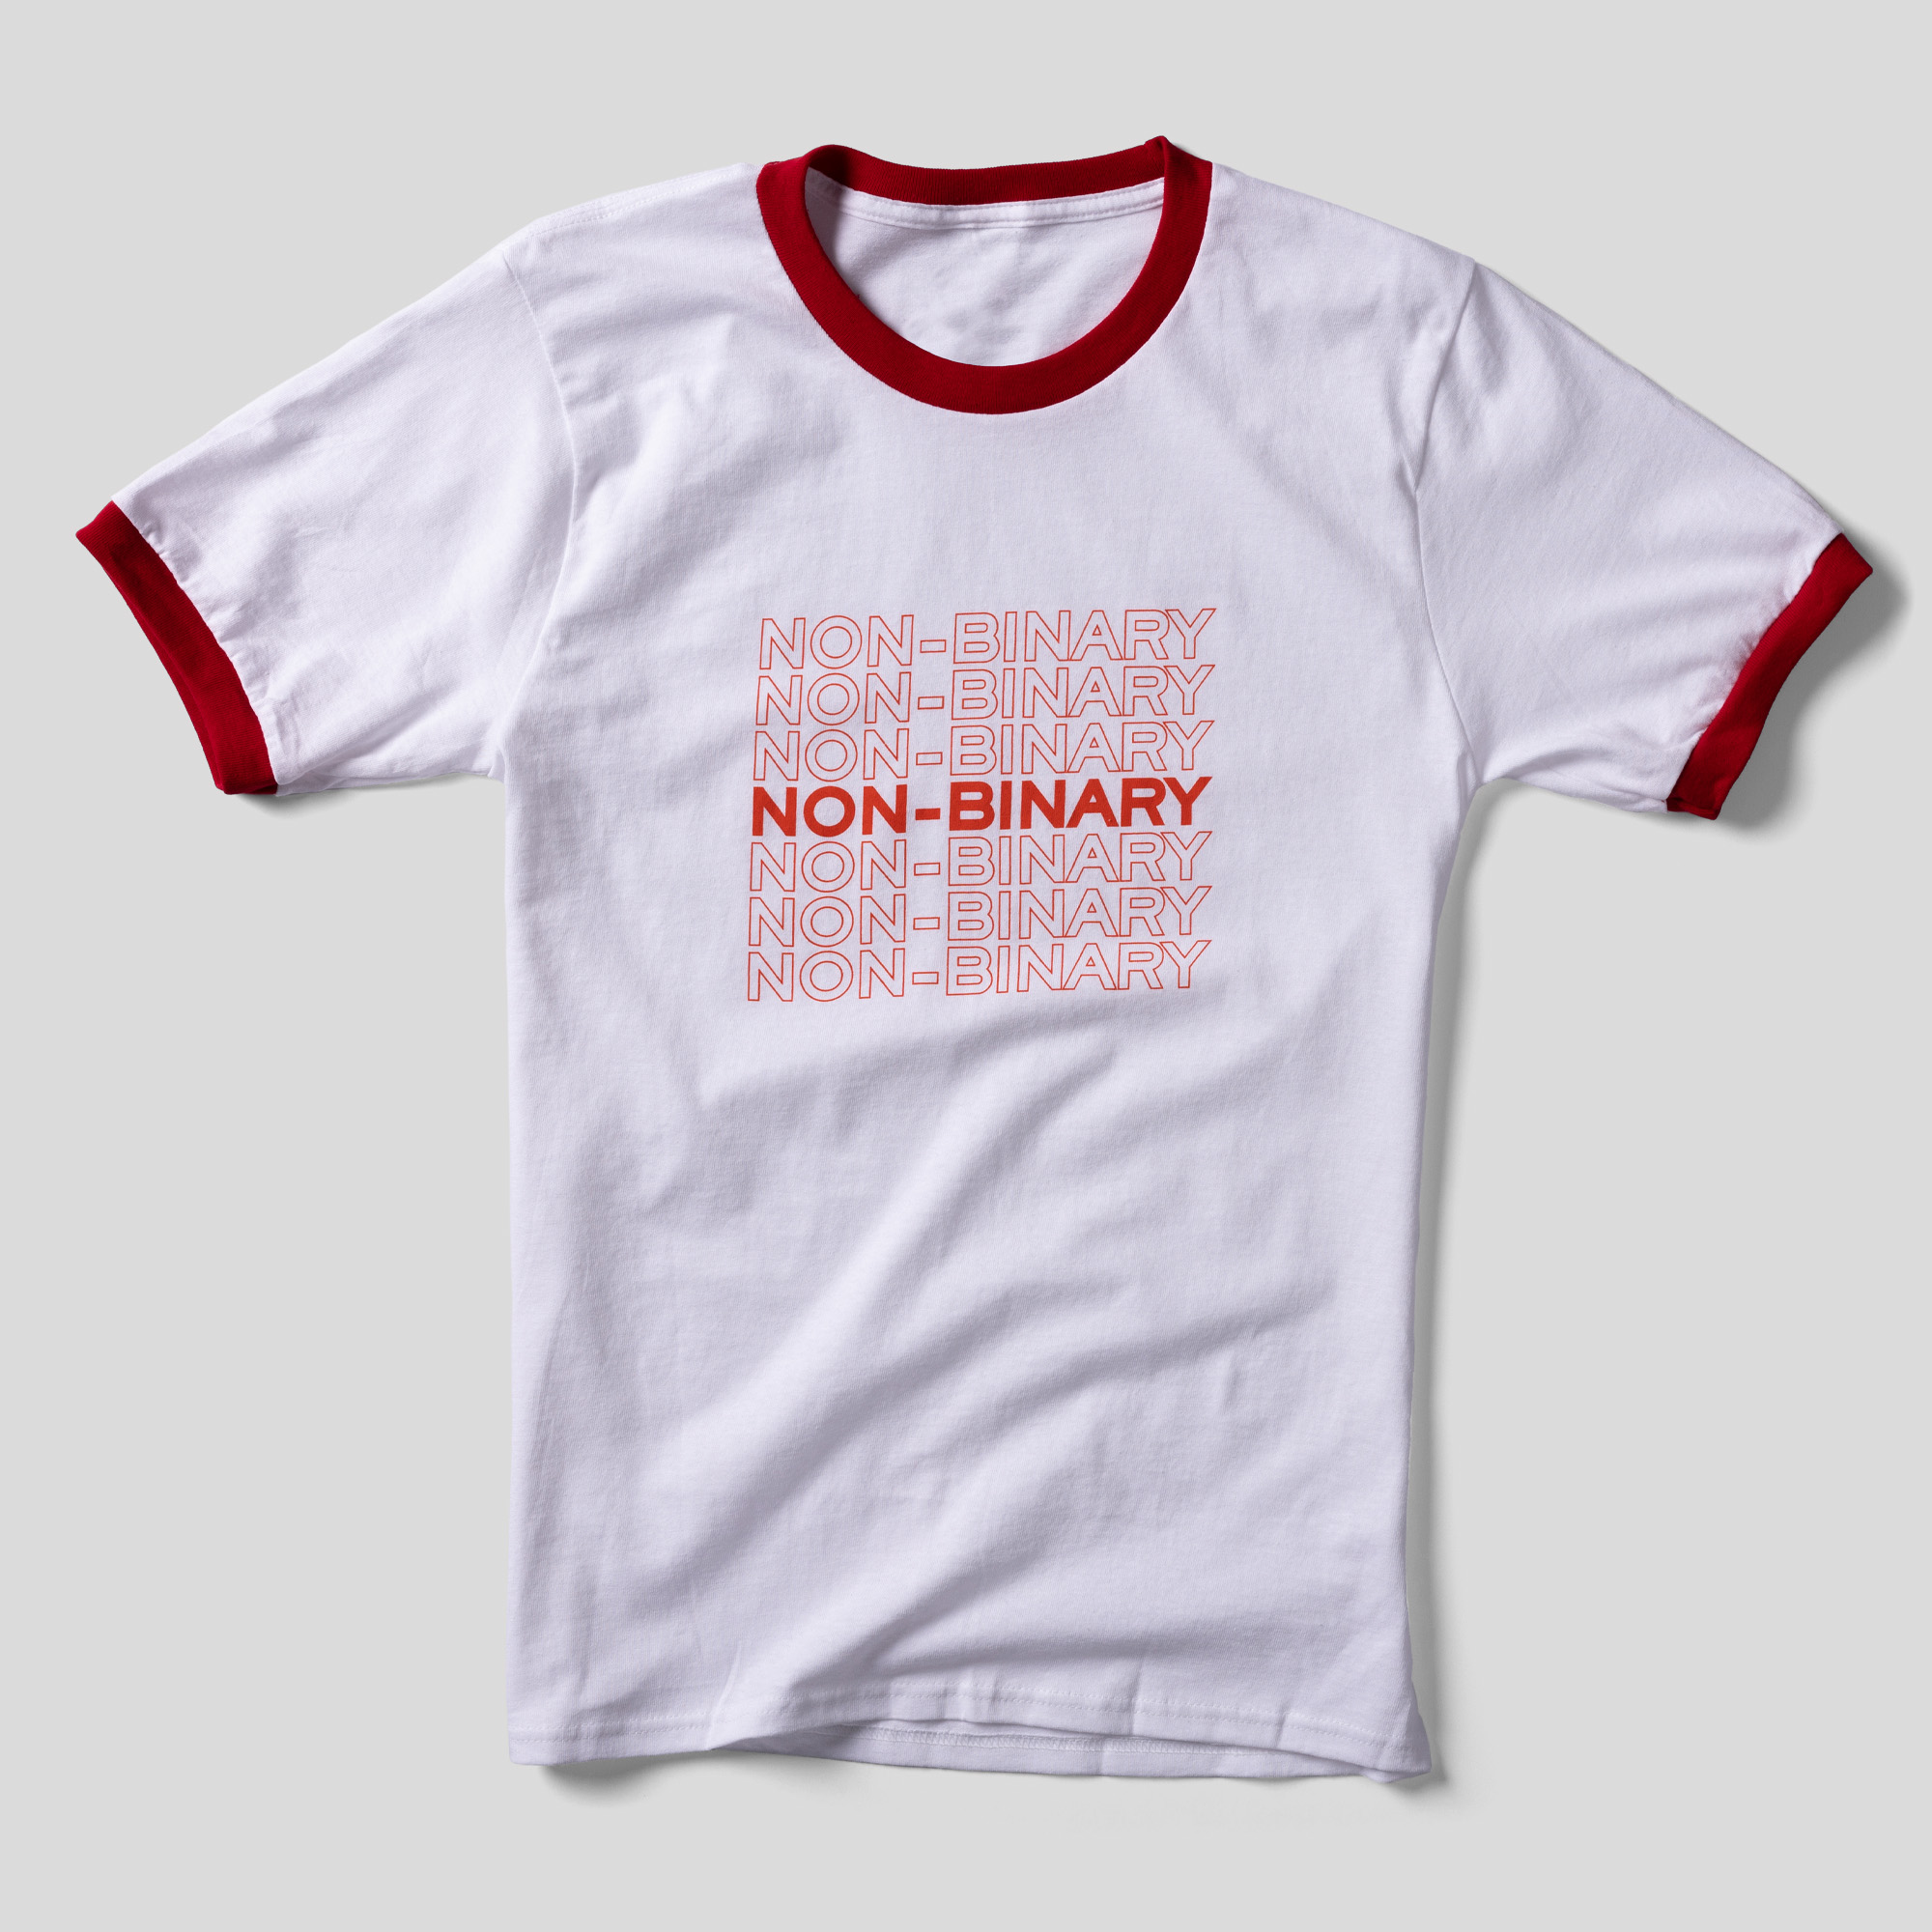 A white t-shirt with red-lined head and arm holes that says Non-Binary in both lined and solid red letters.